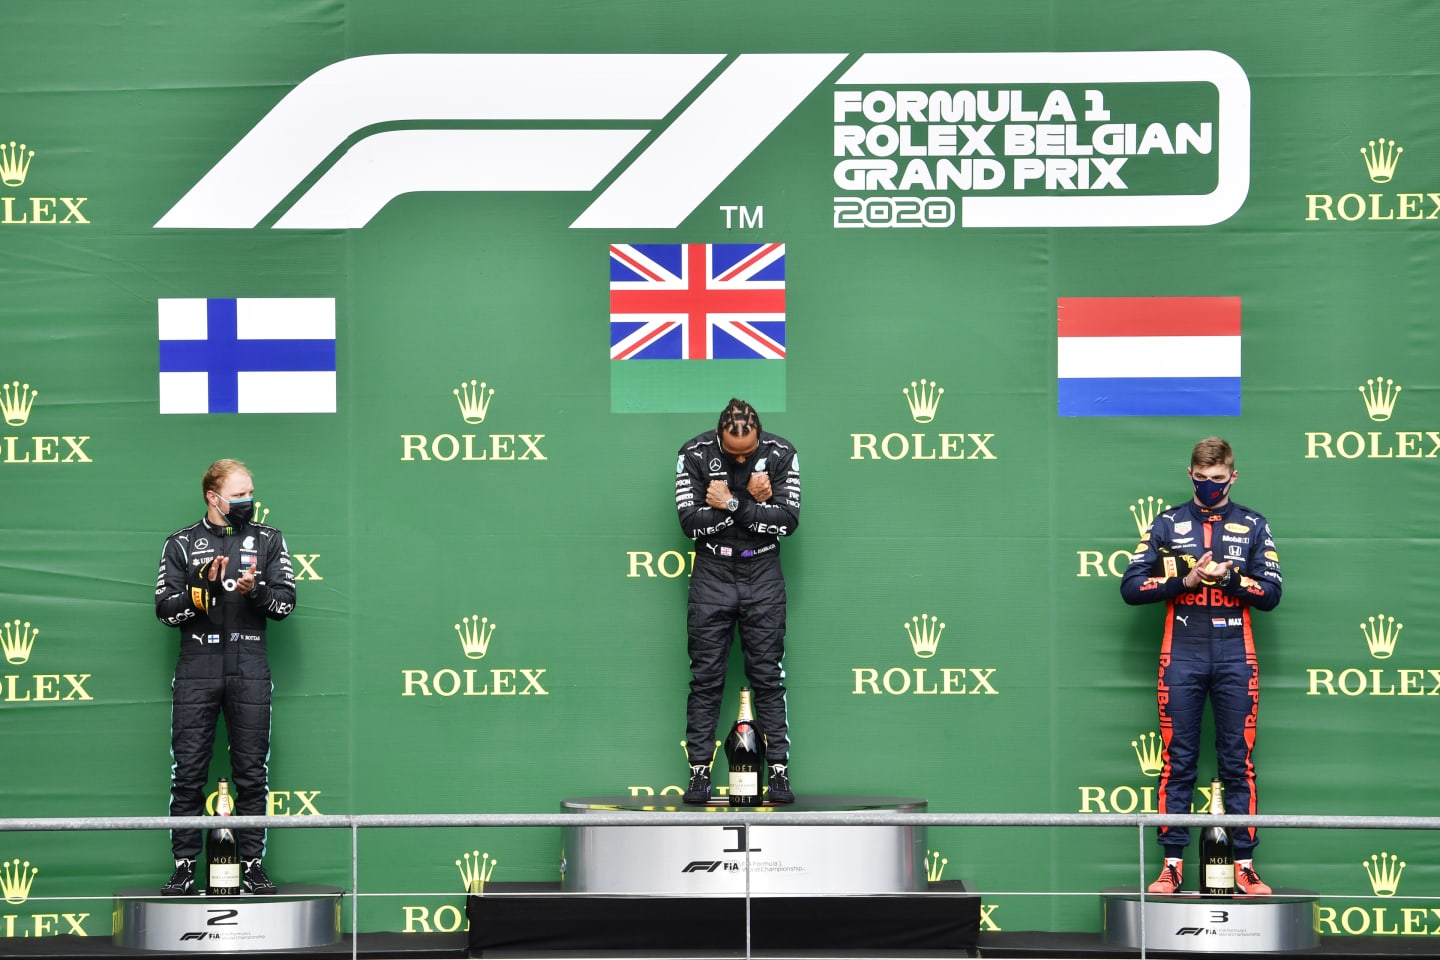 SPA, BELGIUM - AUGUST 30: Race winner Lewis Hamilton of Great Britain and Mercedes GP, second placed Valtteri Bottas of Finland and Mercedes GP and third placed Max Verstappen of Netherlands and Red Bull Racing stand on the podium during the F1 Grand Prix of Belgium at Circuit de Spa-Francorchamps on August 30, 2020 in Spa, Belgium. (Photo by John Thuys/Pool via Getty Images)